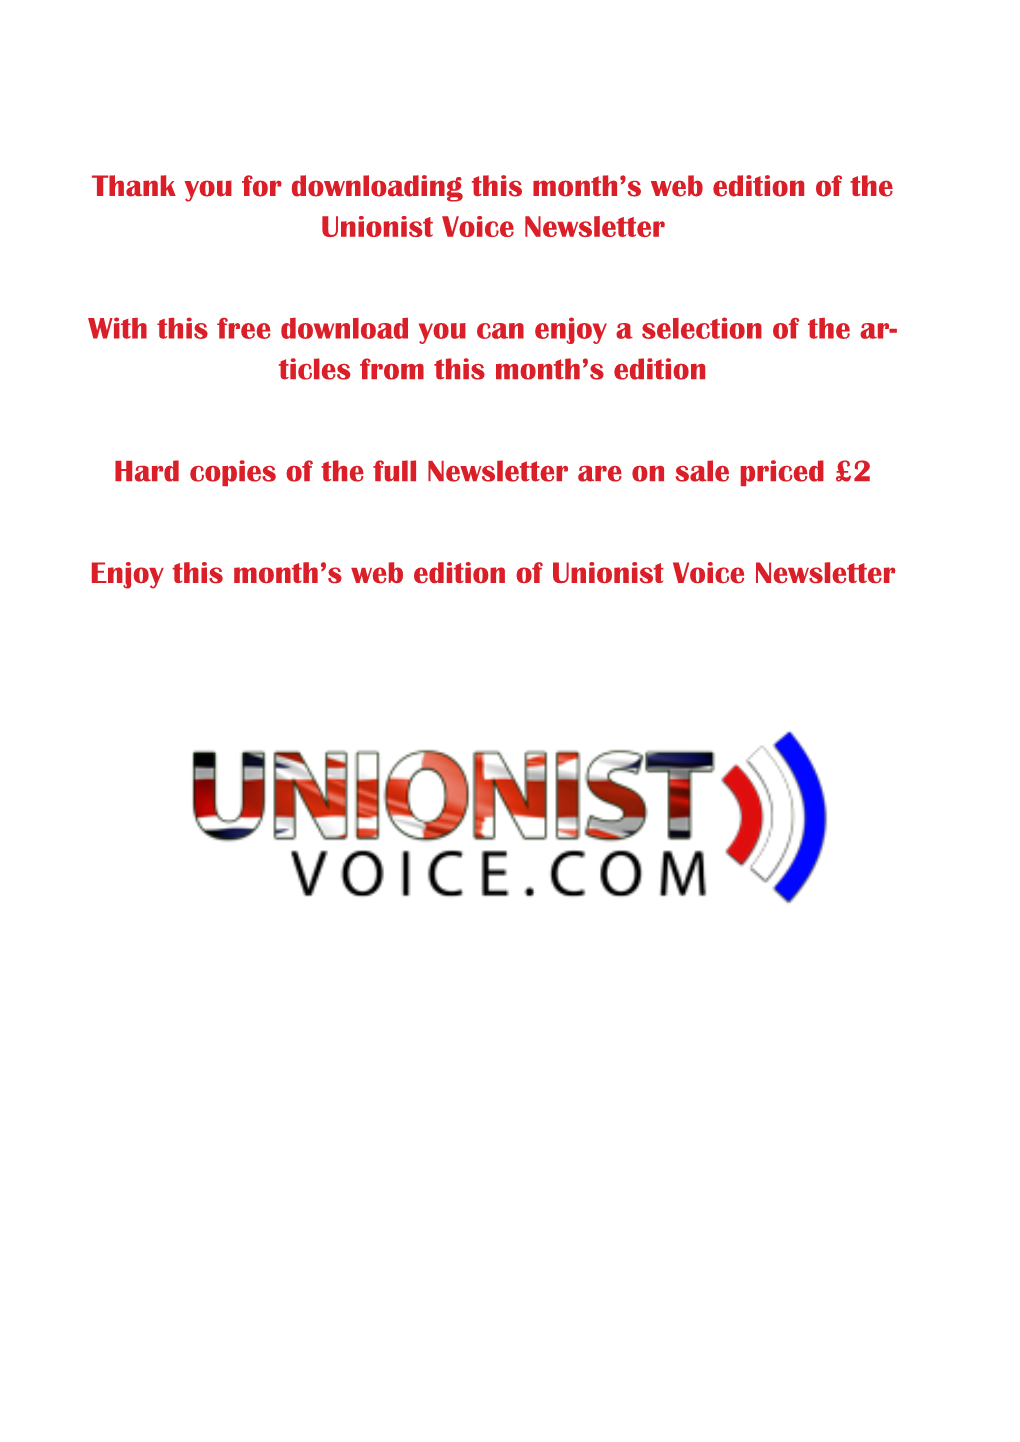 Thank You for Downloading This Month's Web Edition of the Unionist